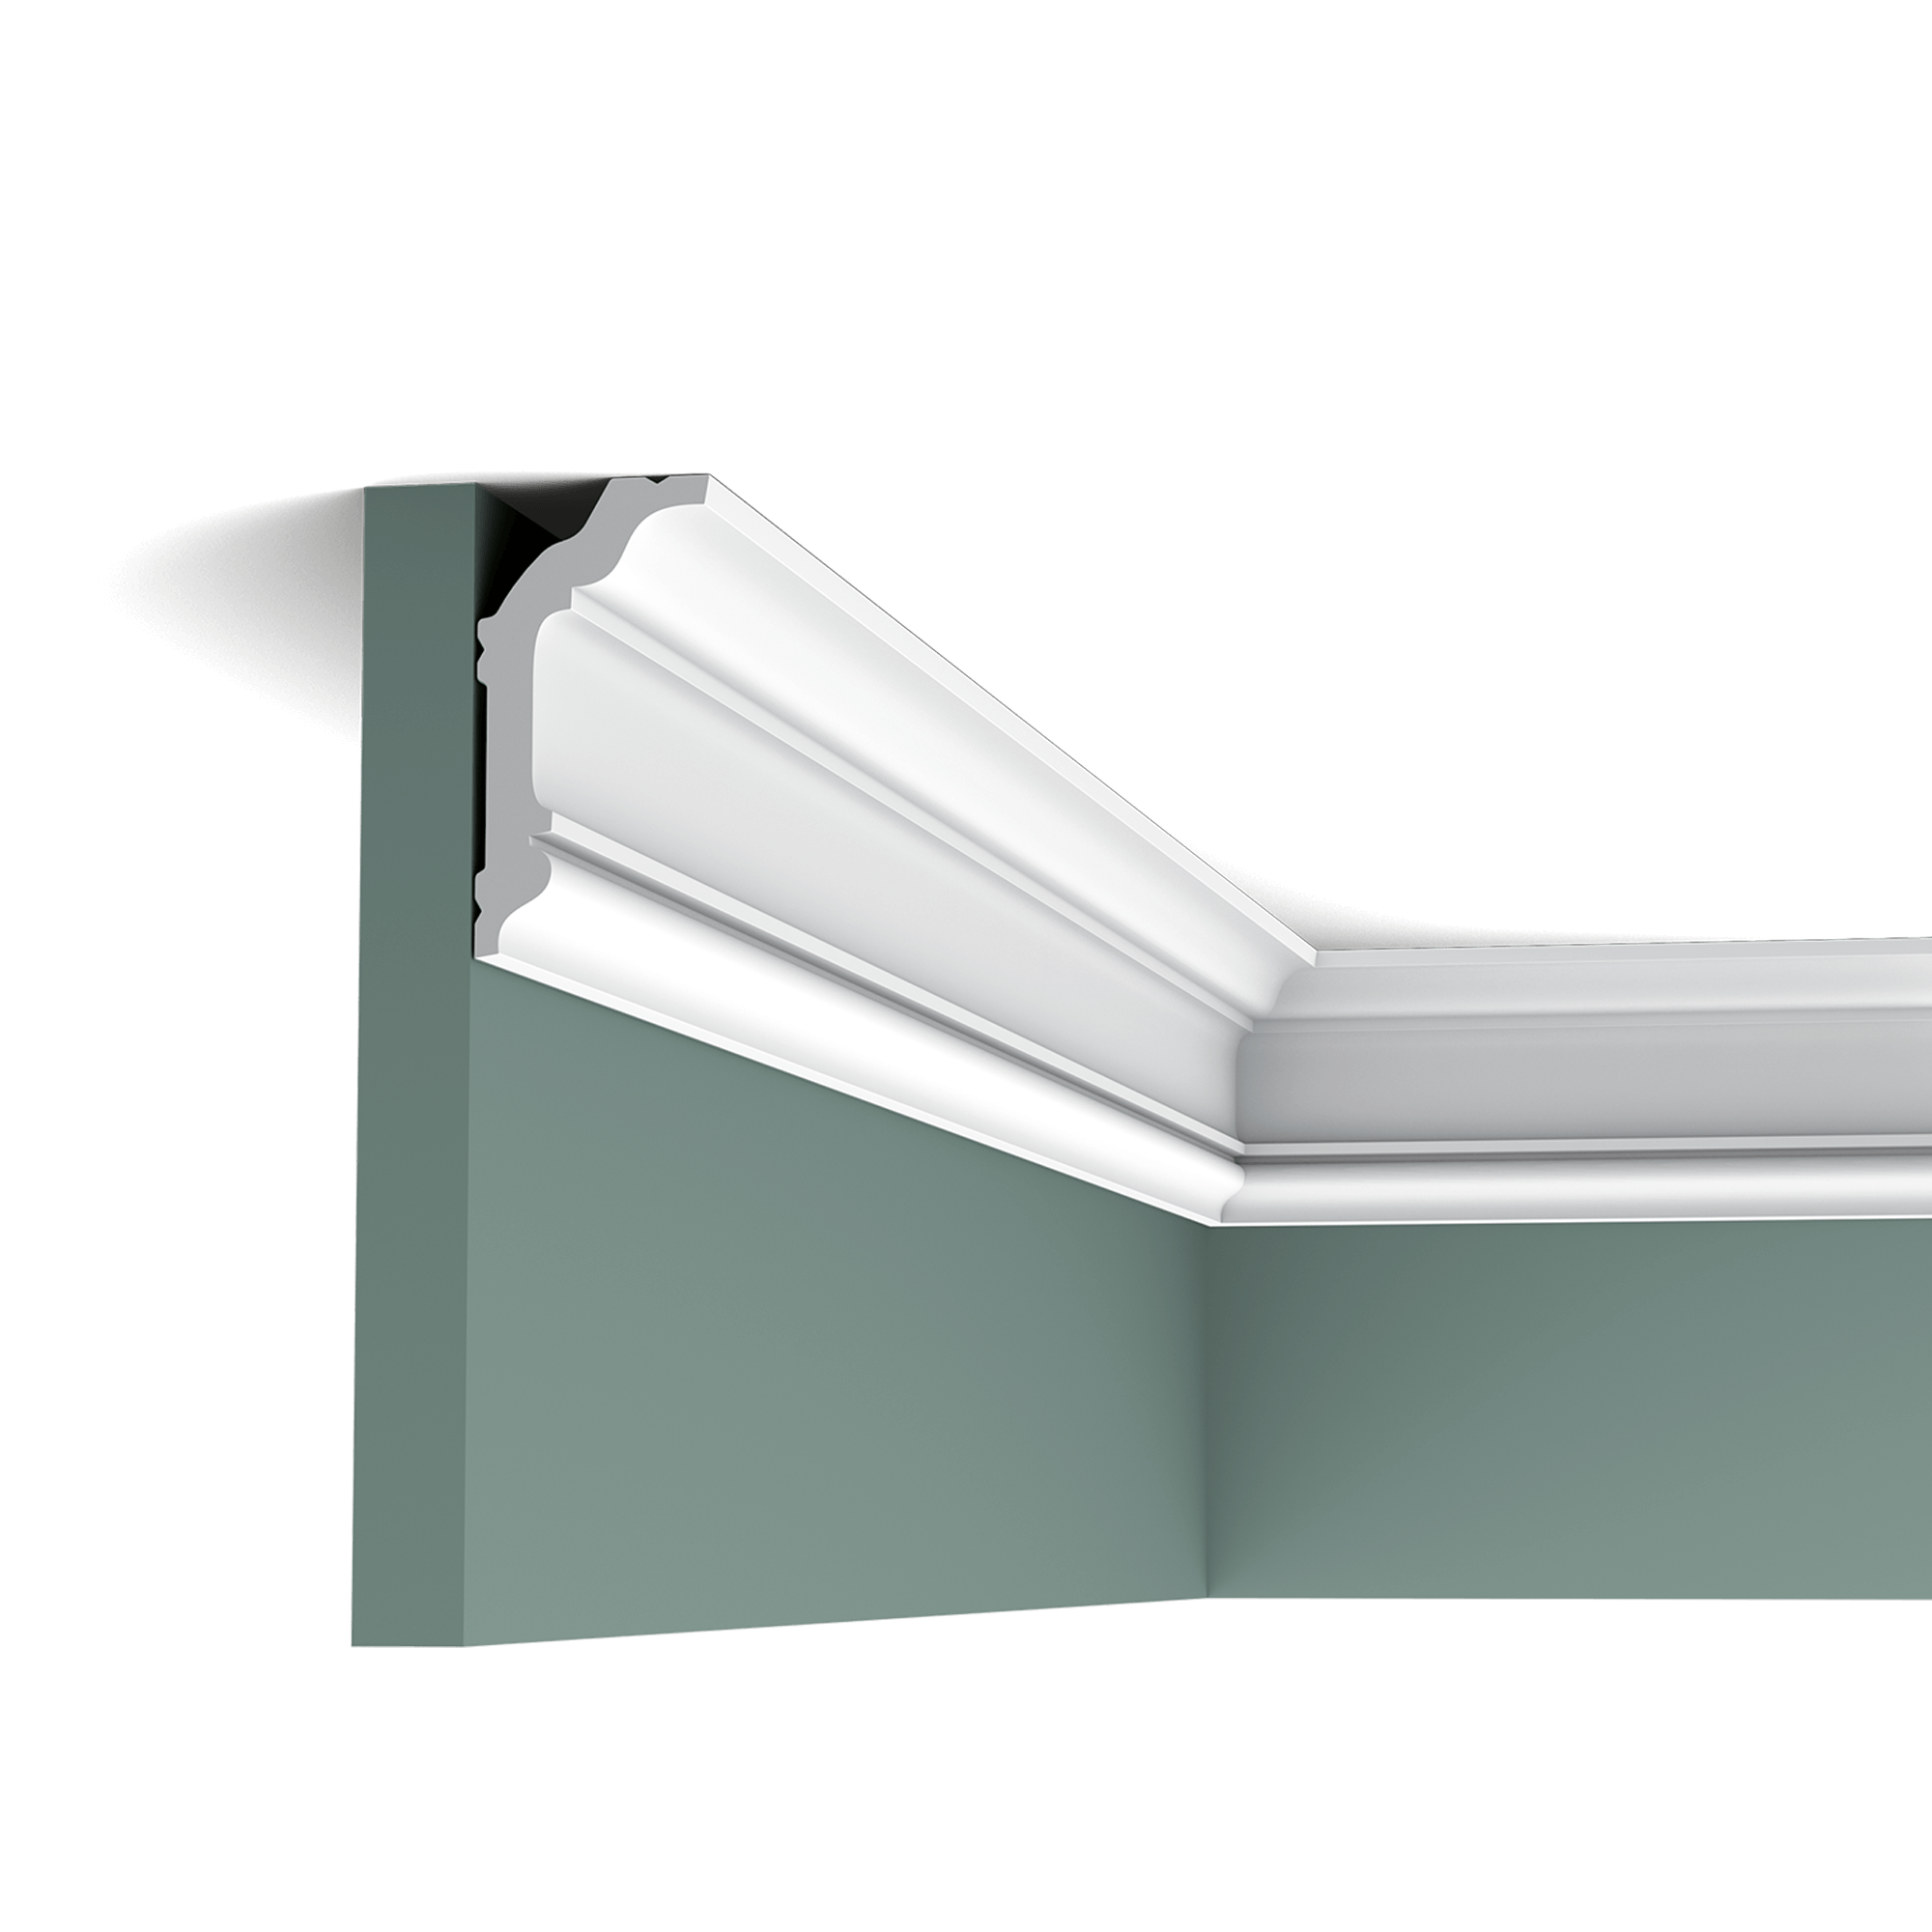 This stately Cotswold cornice moulding is the perfect finish for any space. The CX176 creates an elegant transition between wall and ceiling to add that little something extra to your interior.